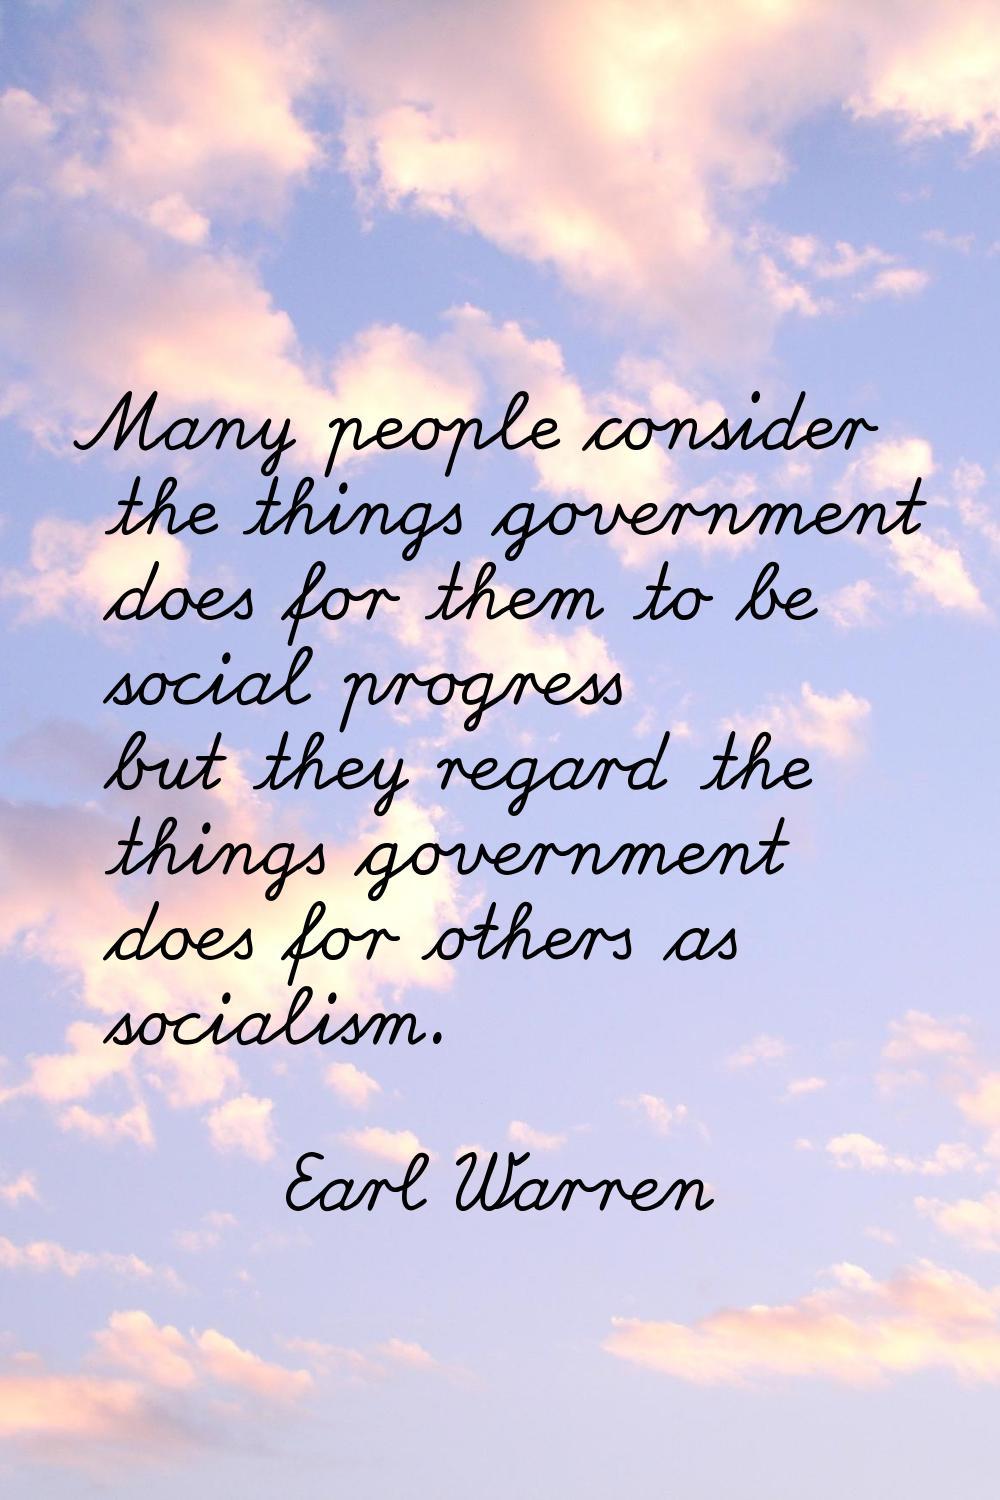 Many people consider the things government does for them to be social progress but they regard the 